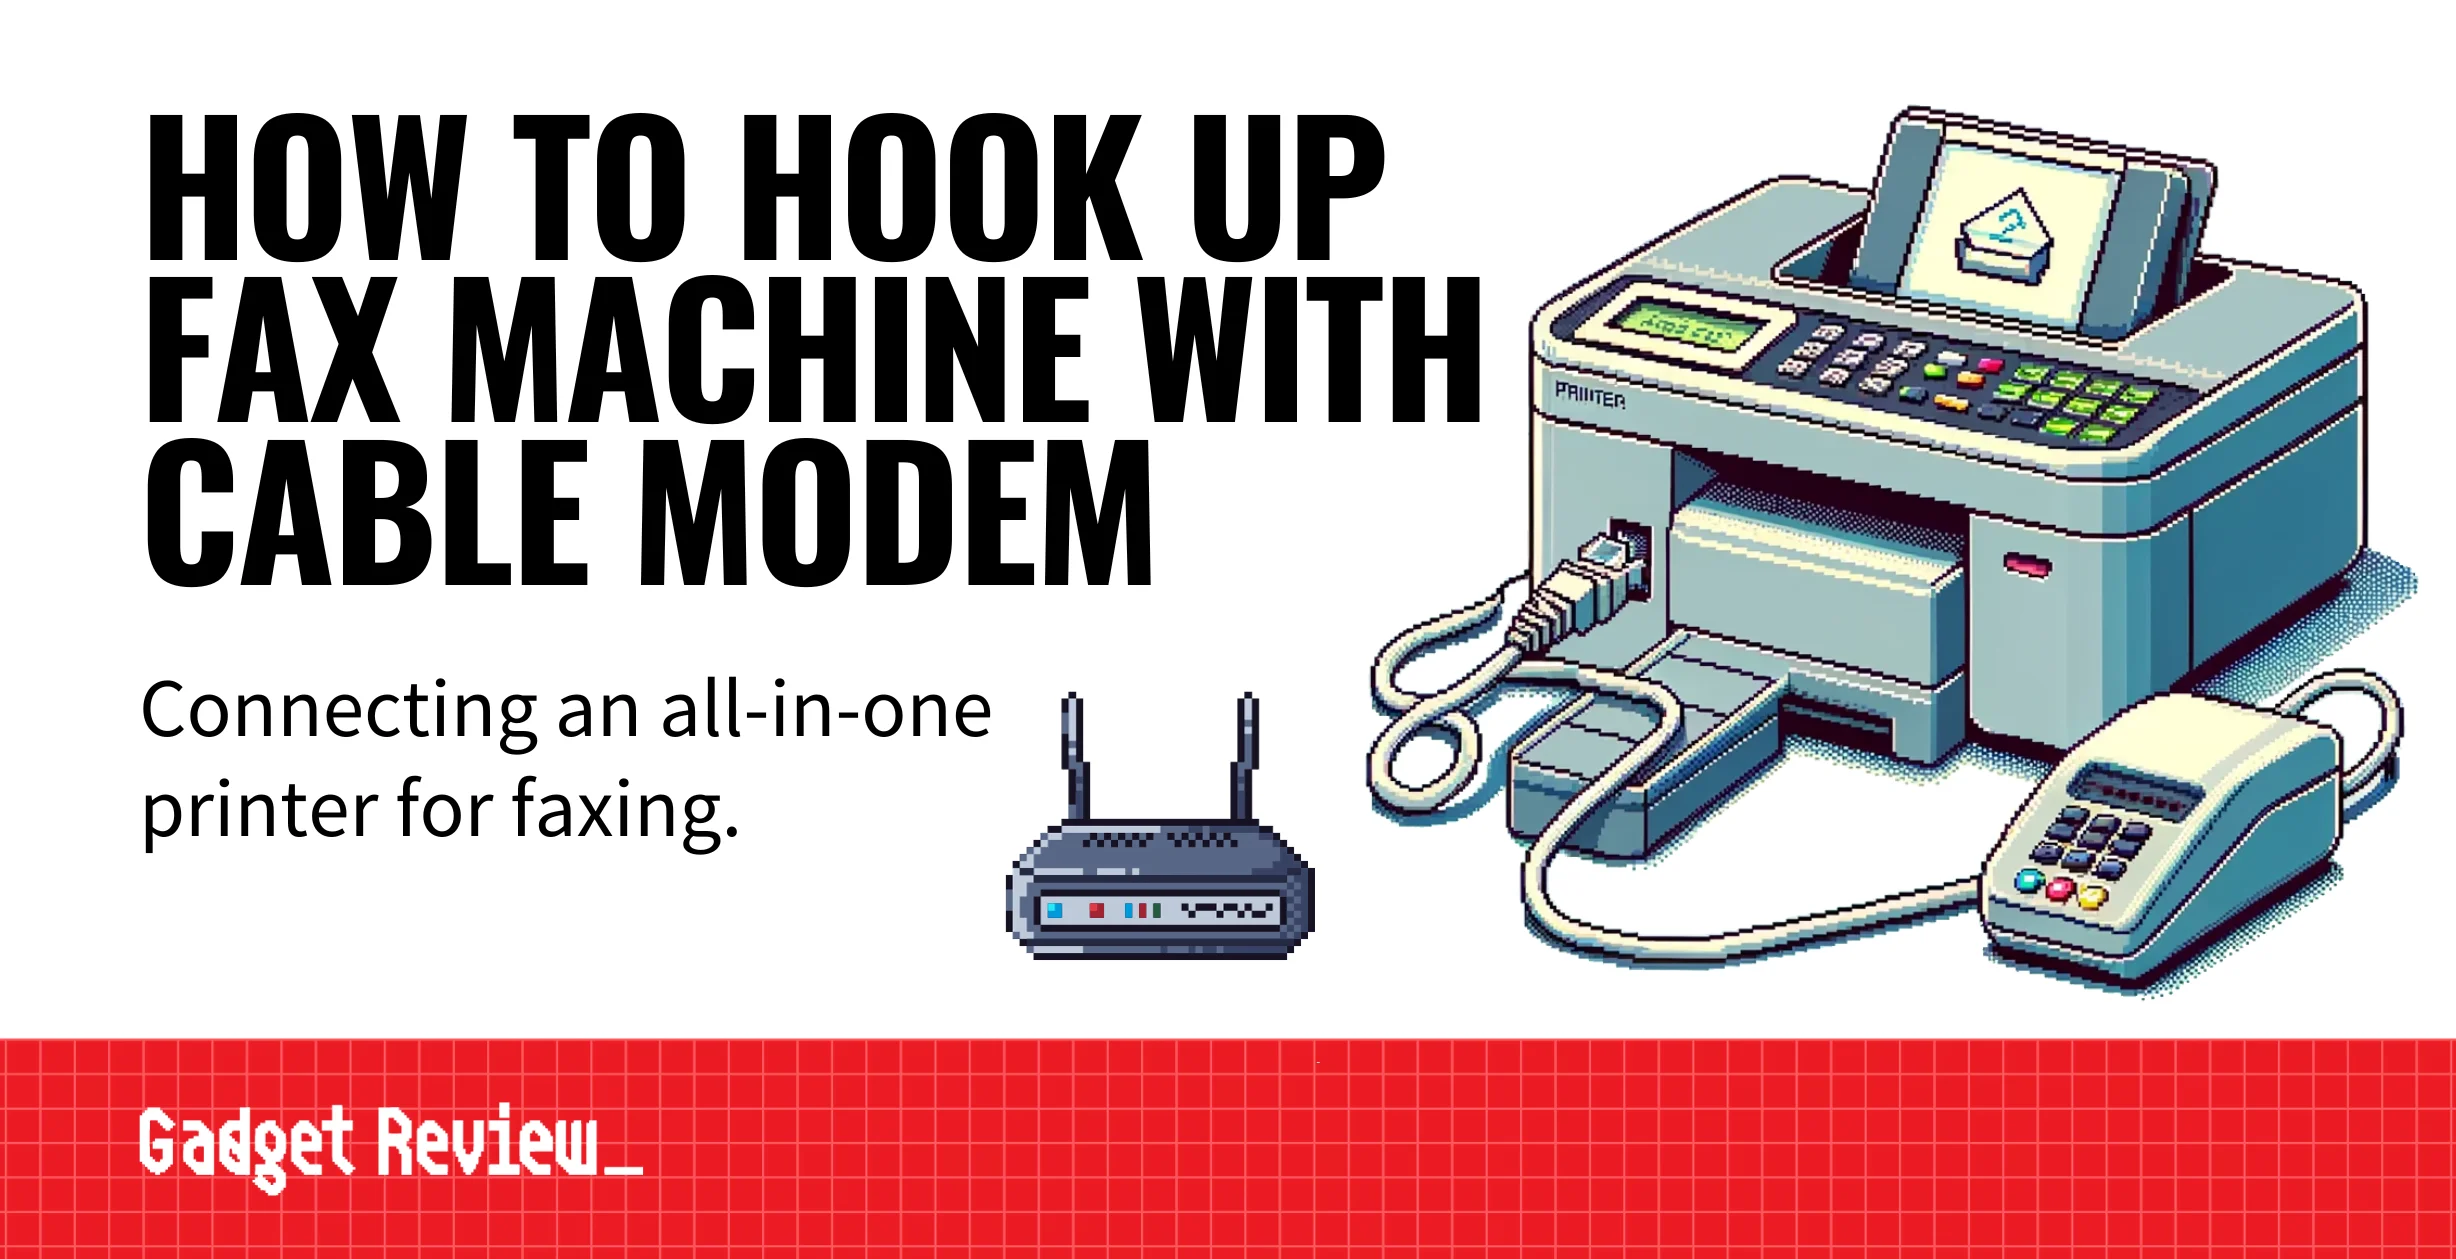 how to hook up fax machine with cable modem guide